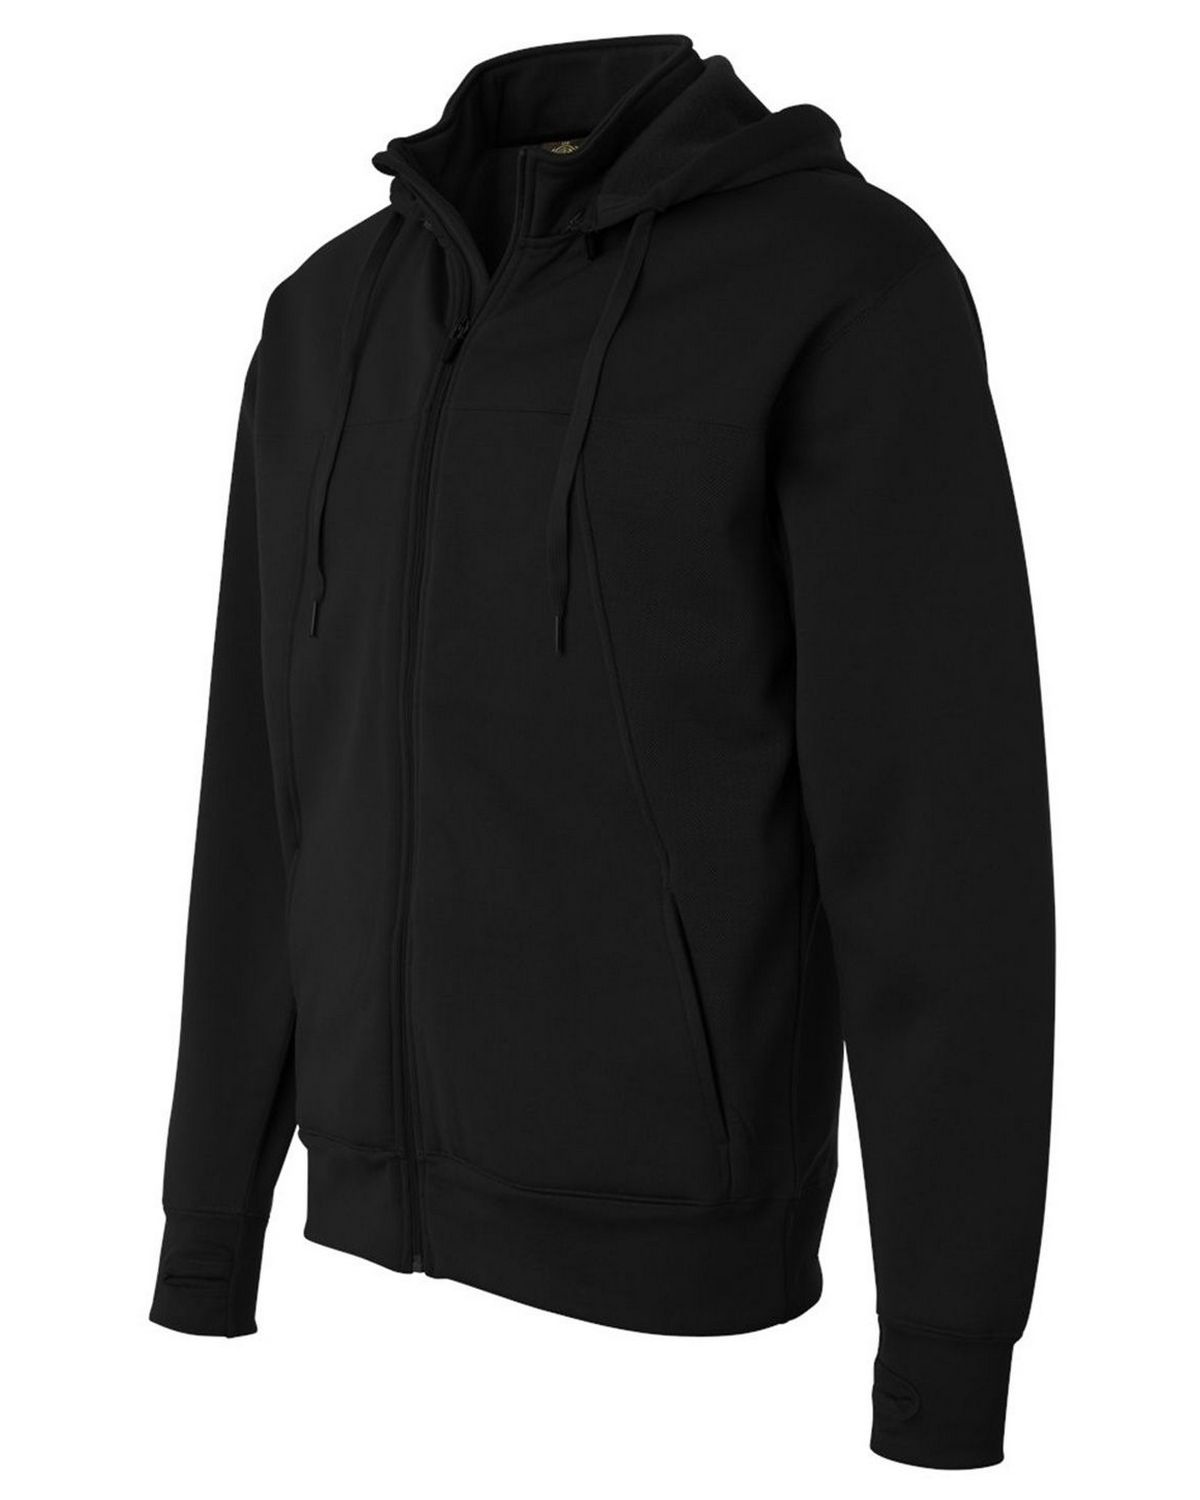 'Independent Trading Co. EXP80PTZ Poly-Tech Hooded Full-Zip Sweatshirt'